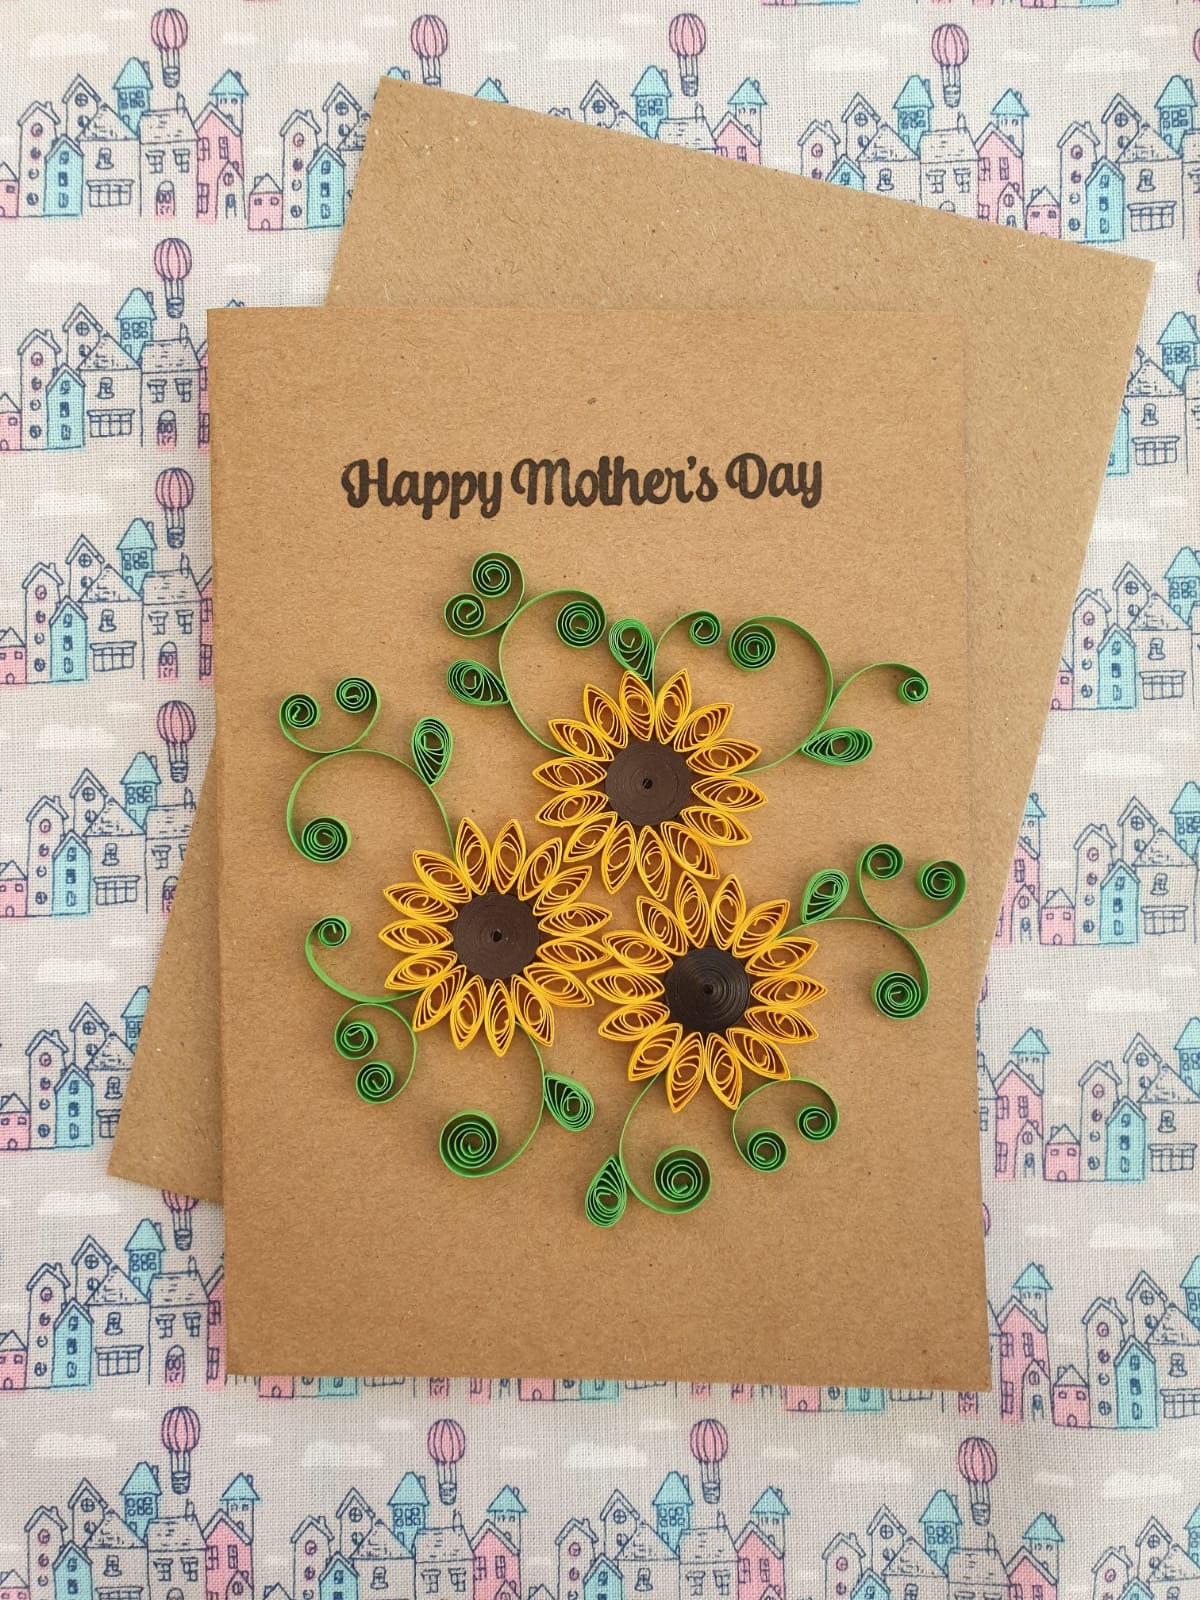 TUMYBee Sunflower Greeting Card for Mom | Happy Birthday and Mother Day Quilling Cards | 3D Greeting Card Paper Handmade Art - Design Greeting Card